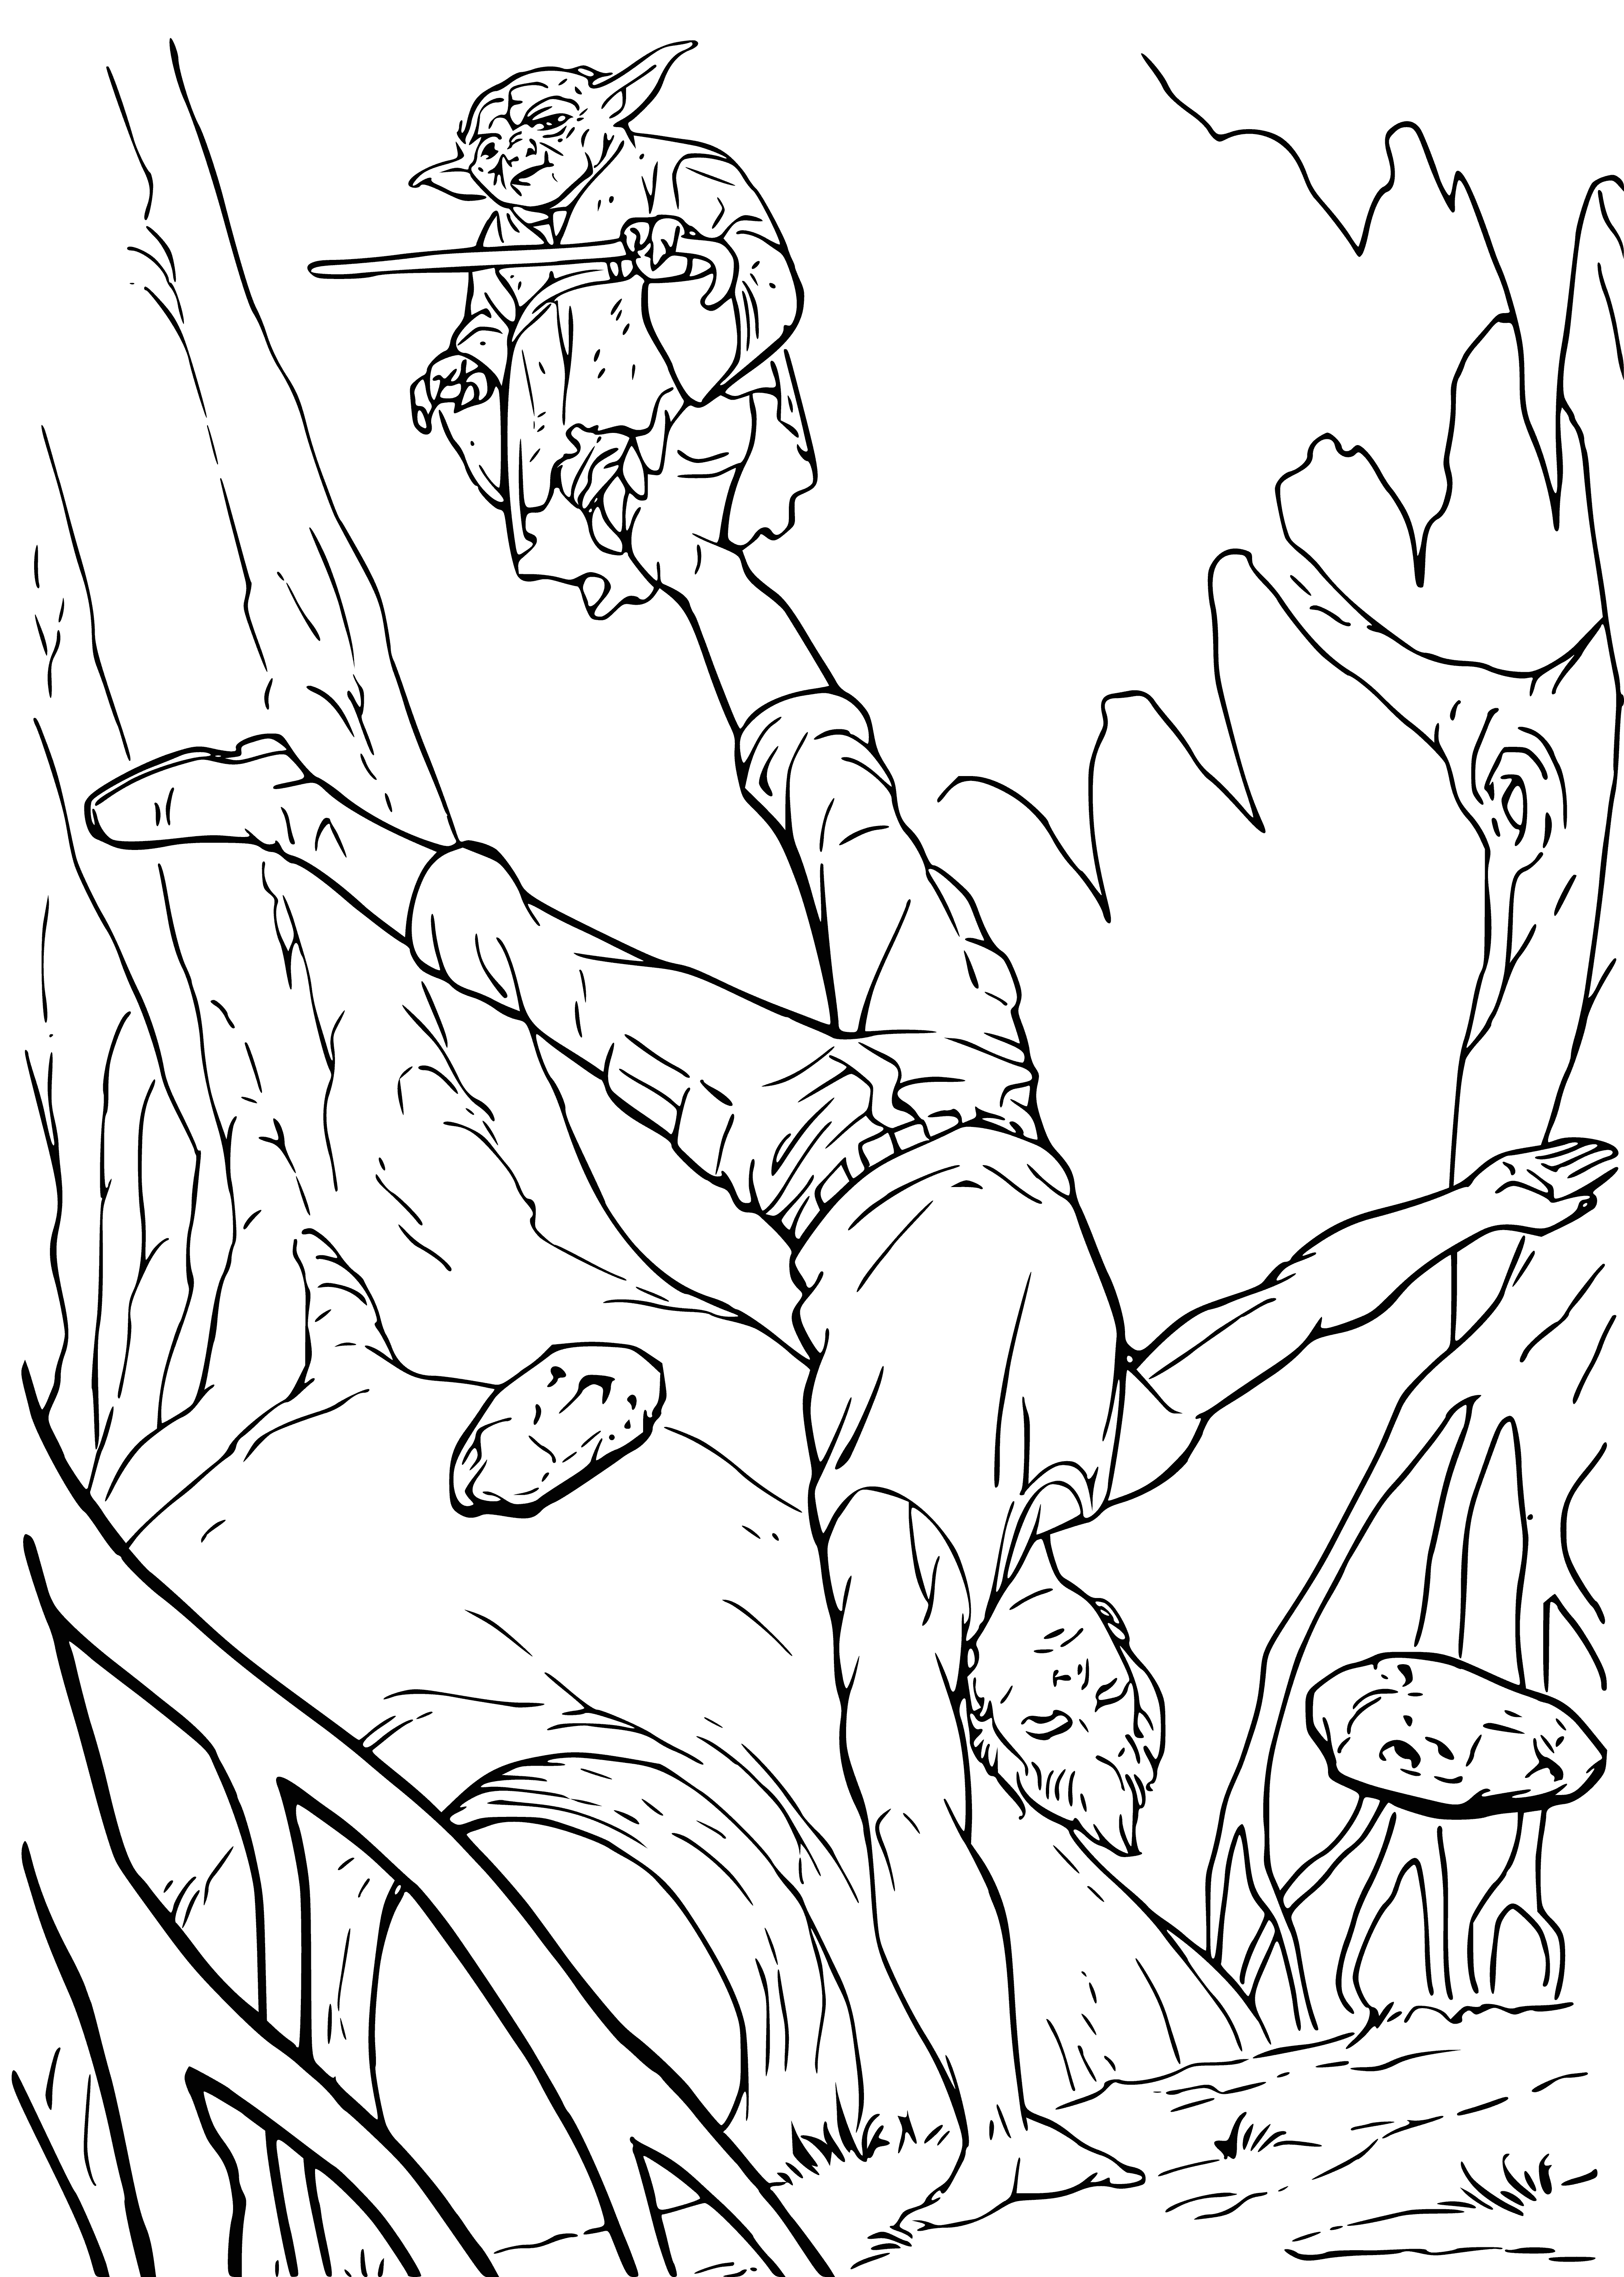 coloring page: Man kneeling on battleground at night, hands clasped, w/fire burning in the distance from a crashed ship.